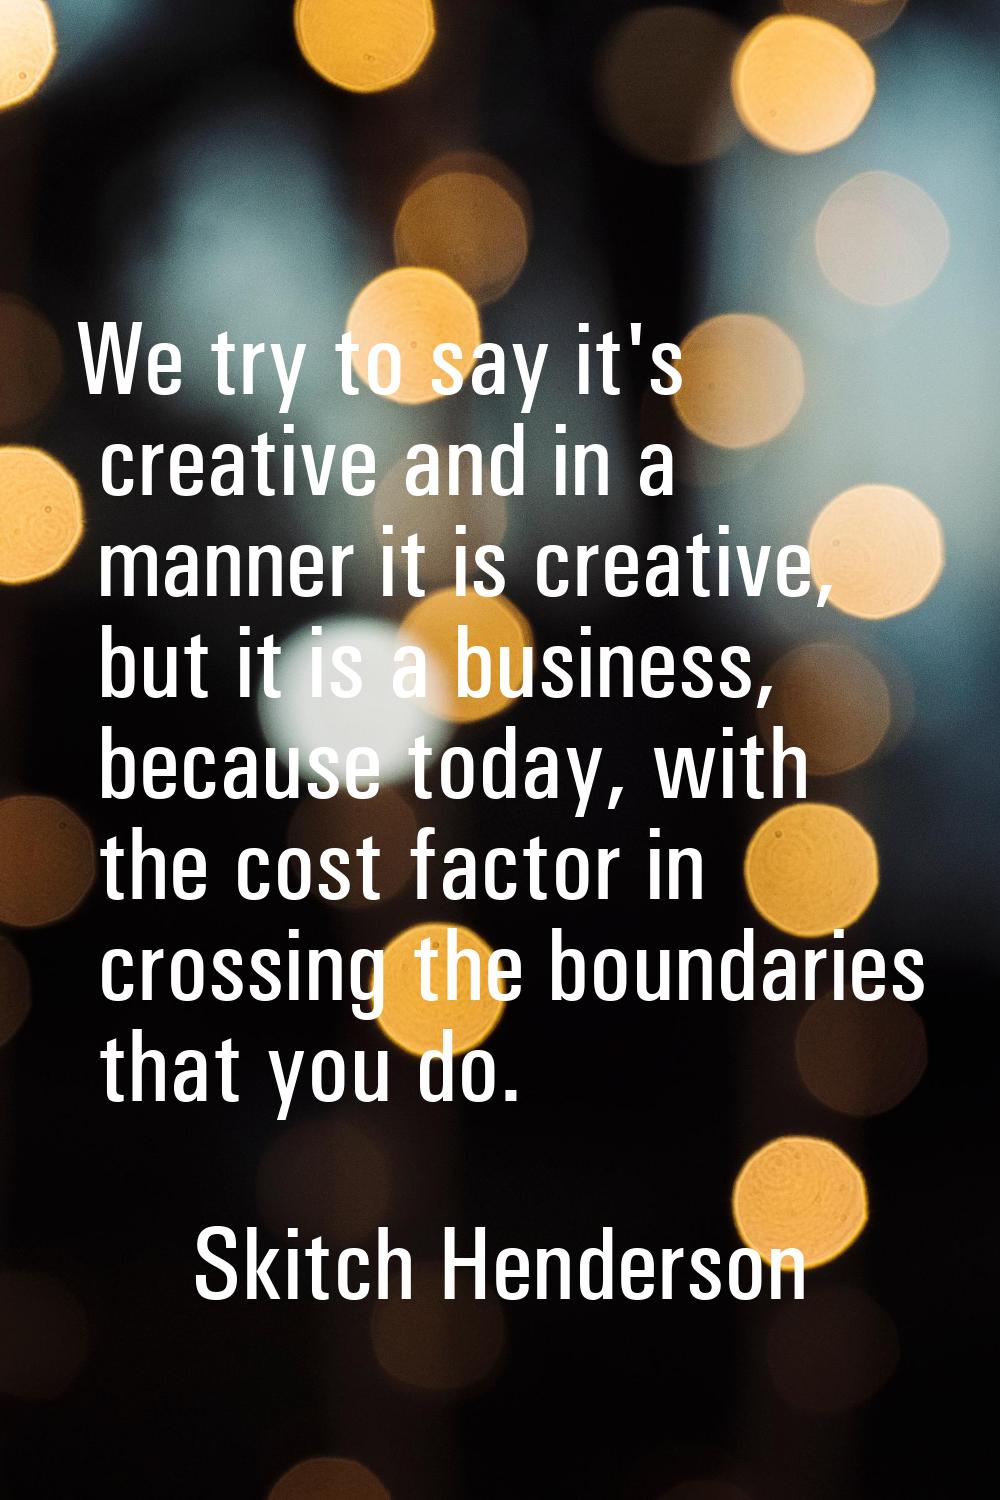 We try to say it's creative and in a manner it is creative, but it is a business, because today, wi